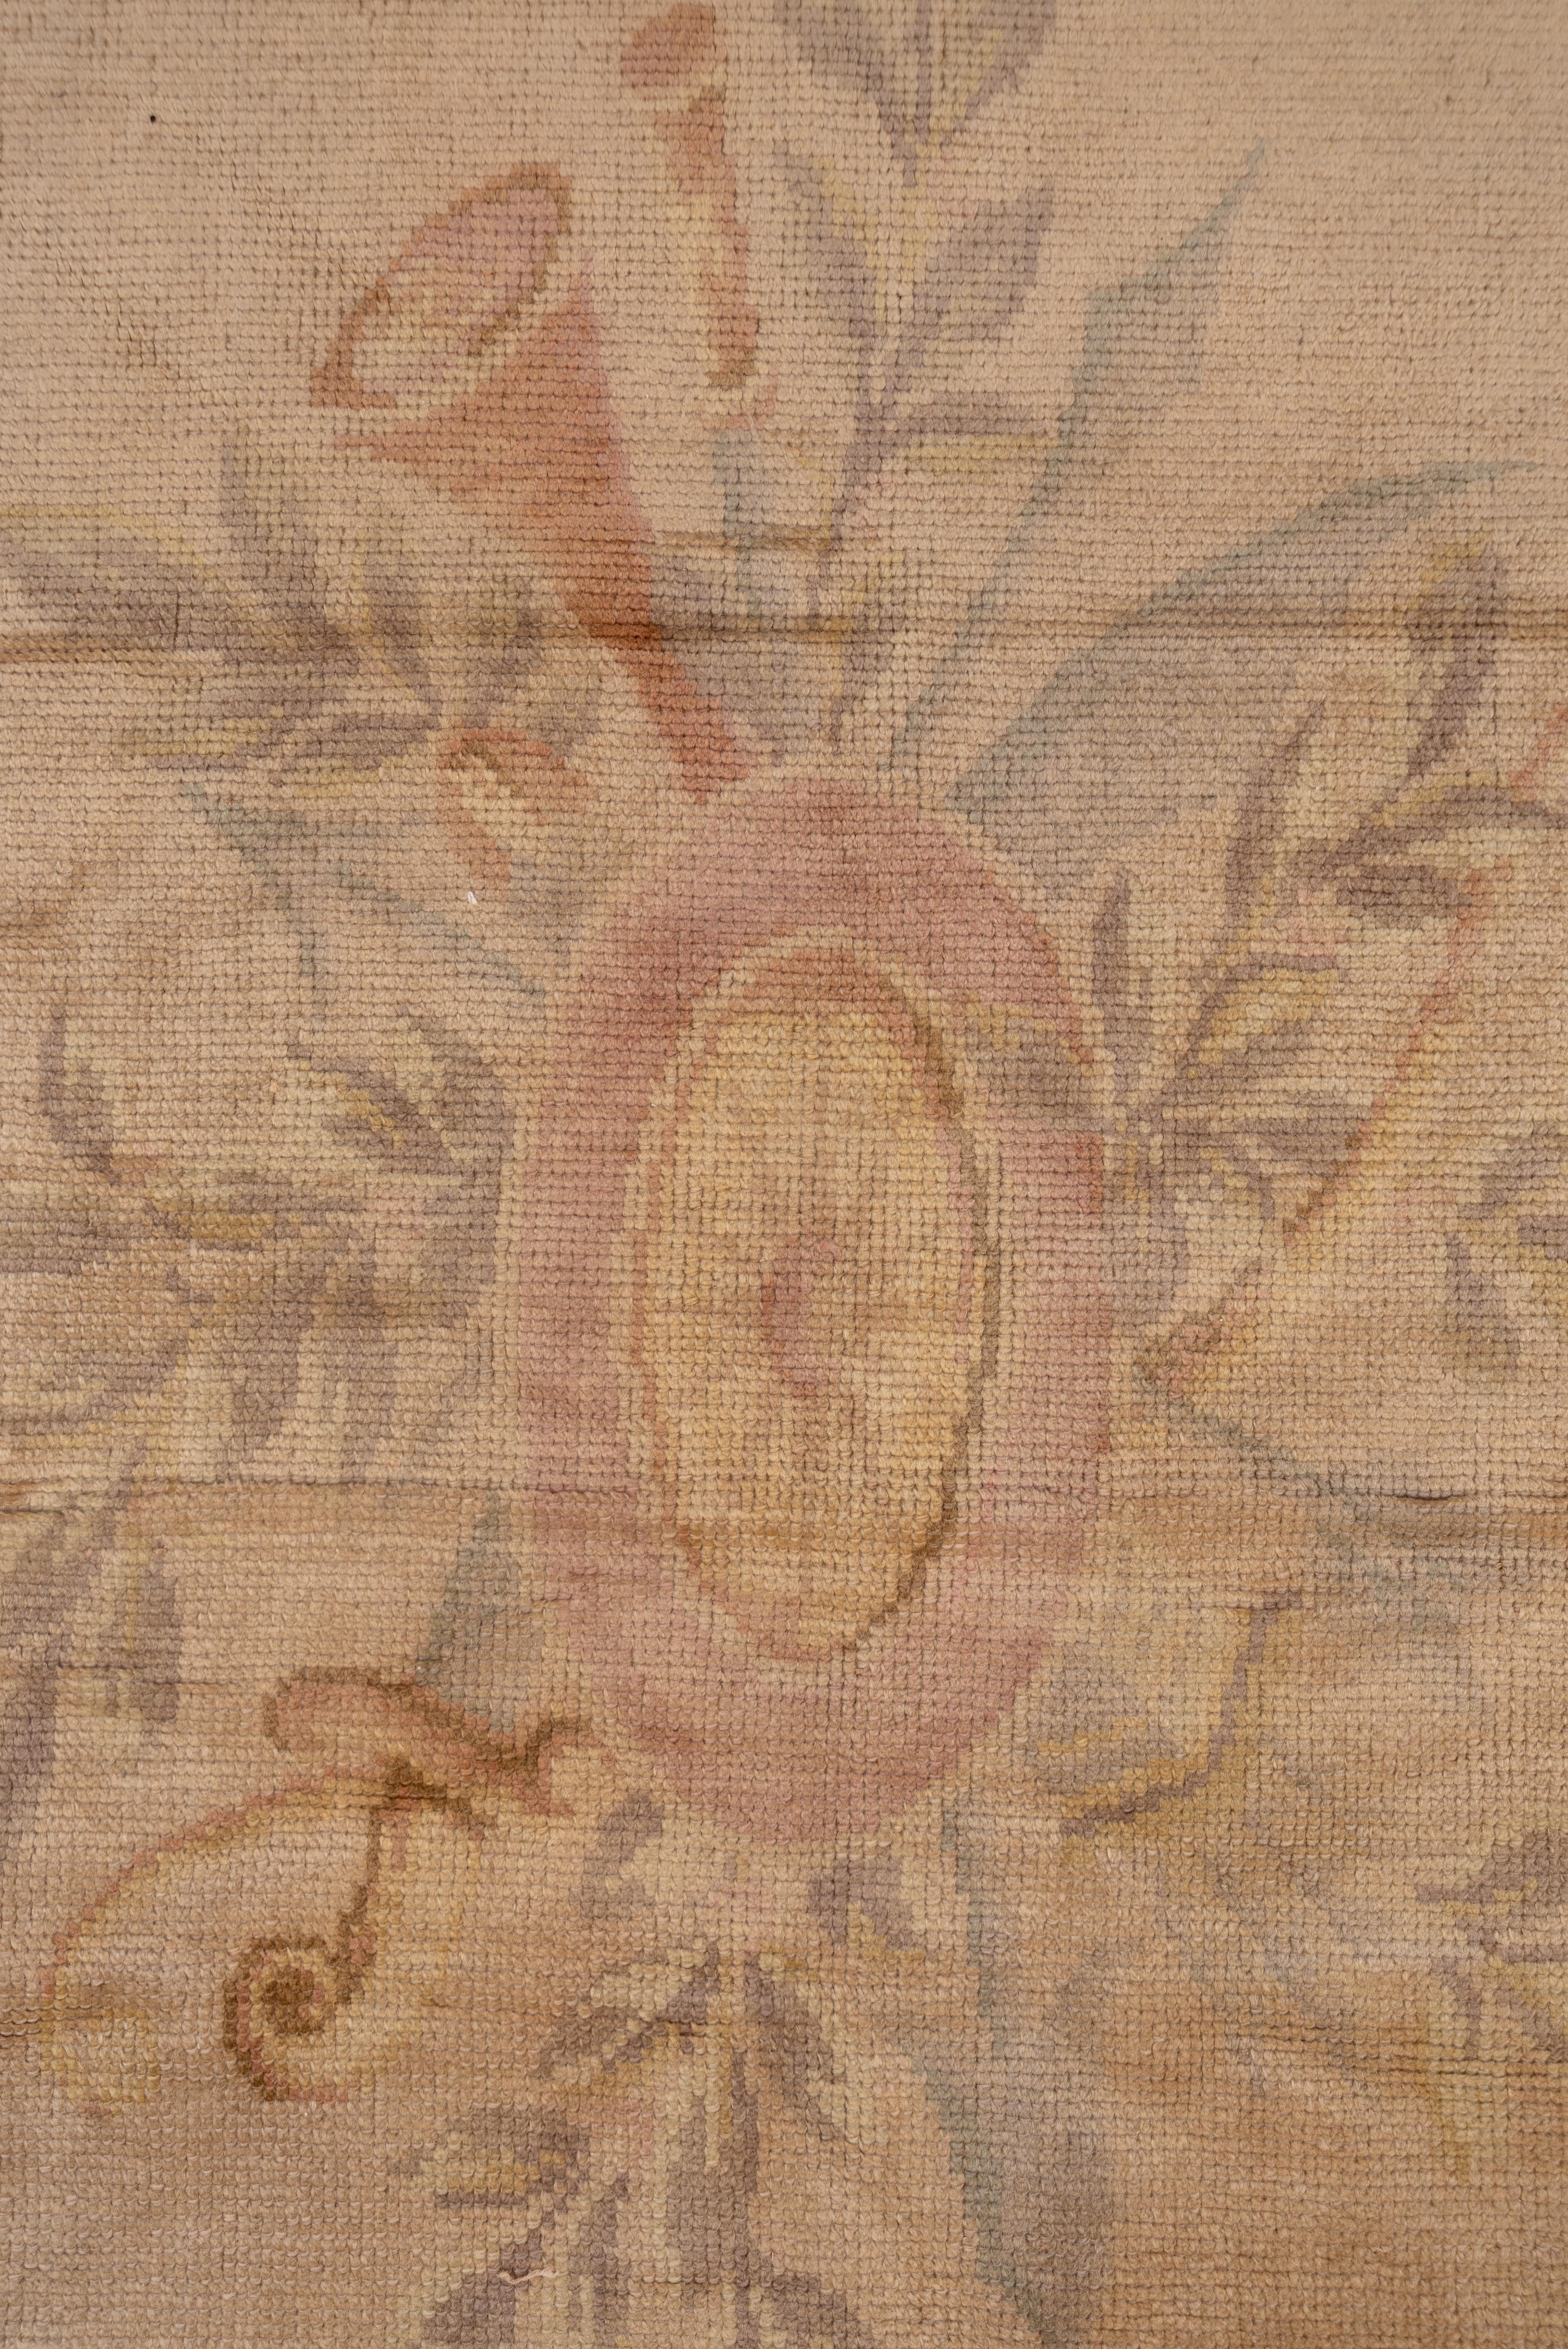 In a French Rococo style, the eggshell field is pointed at one end and shaped by oblique corners and a re-entrant half-cartouche. Small oval medallion with pale straw sub-medallion and mauve-pink border with grasses and flowers. Coarse weave, thick